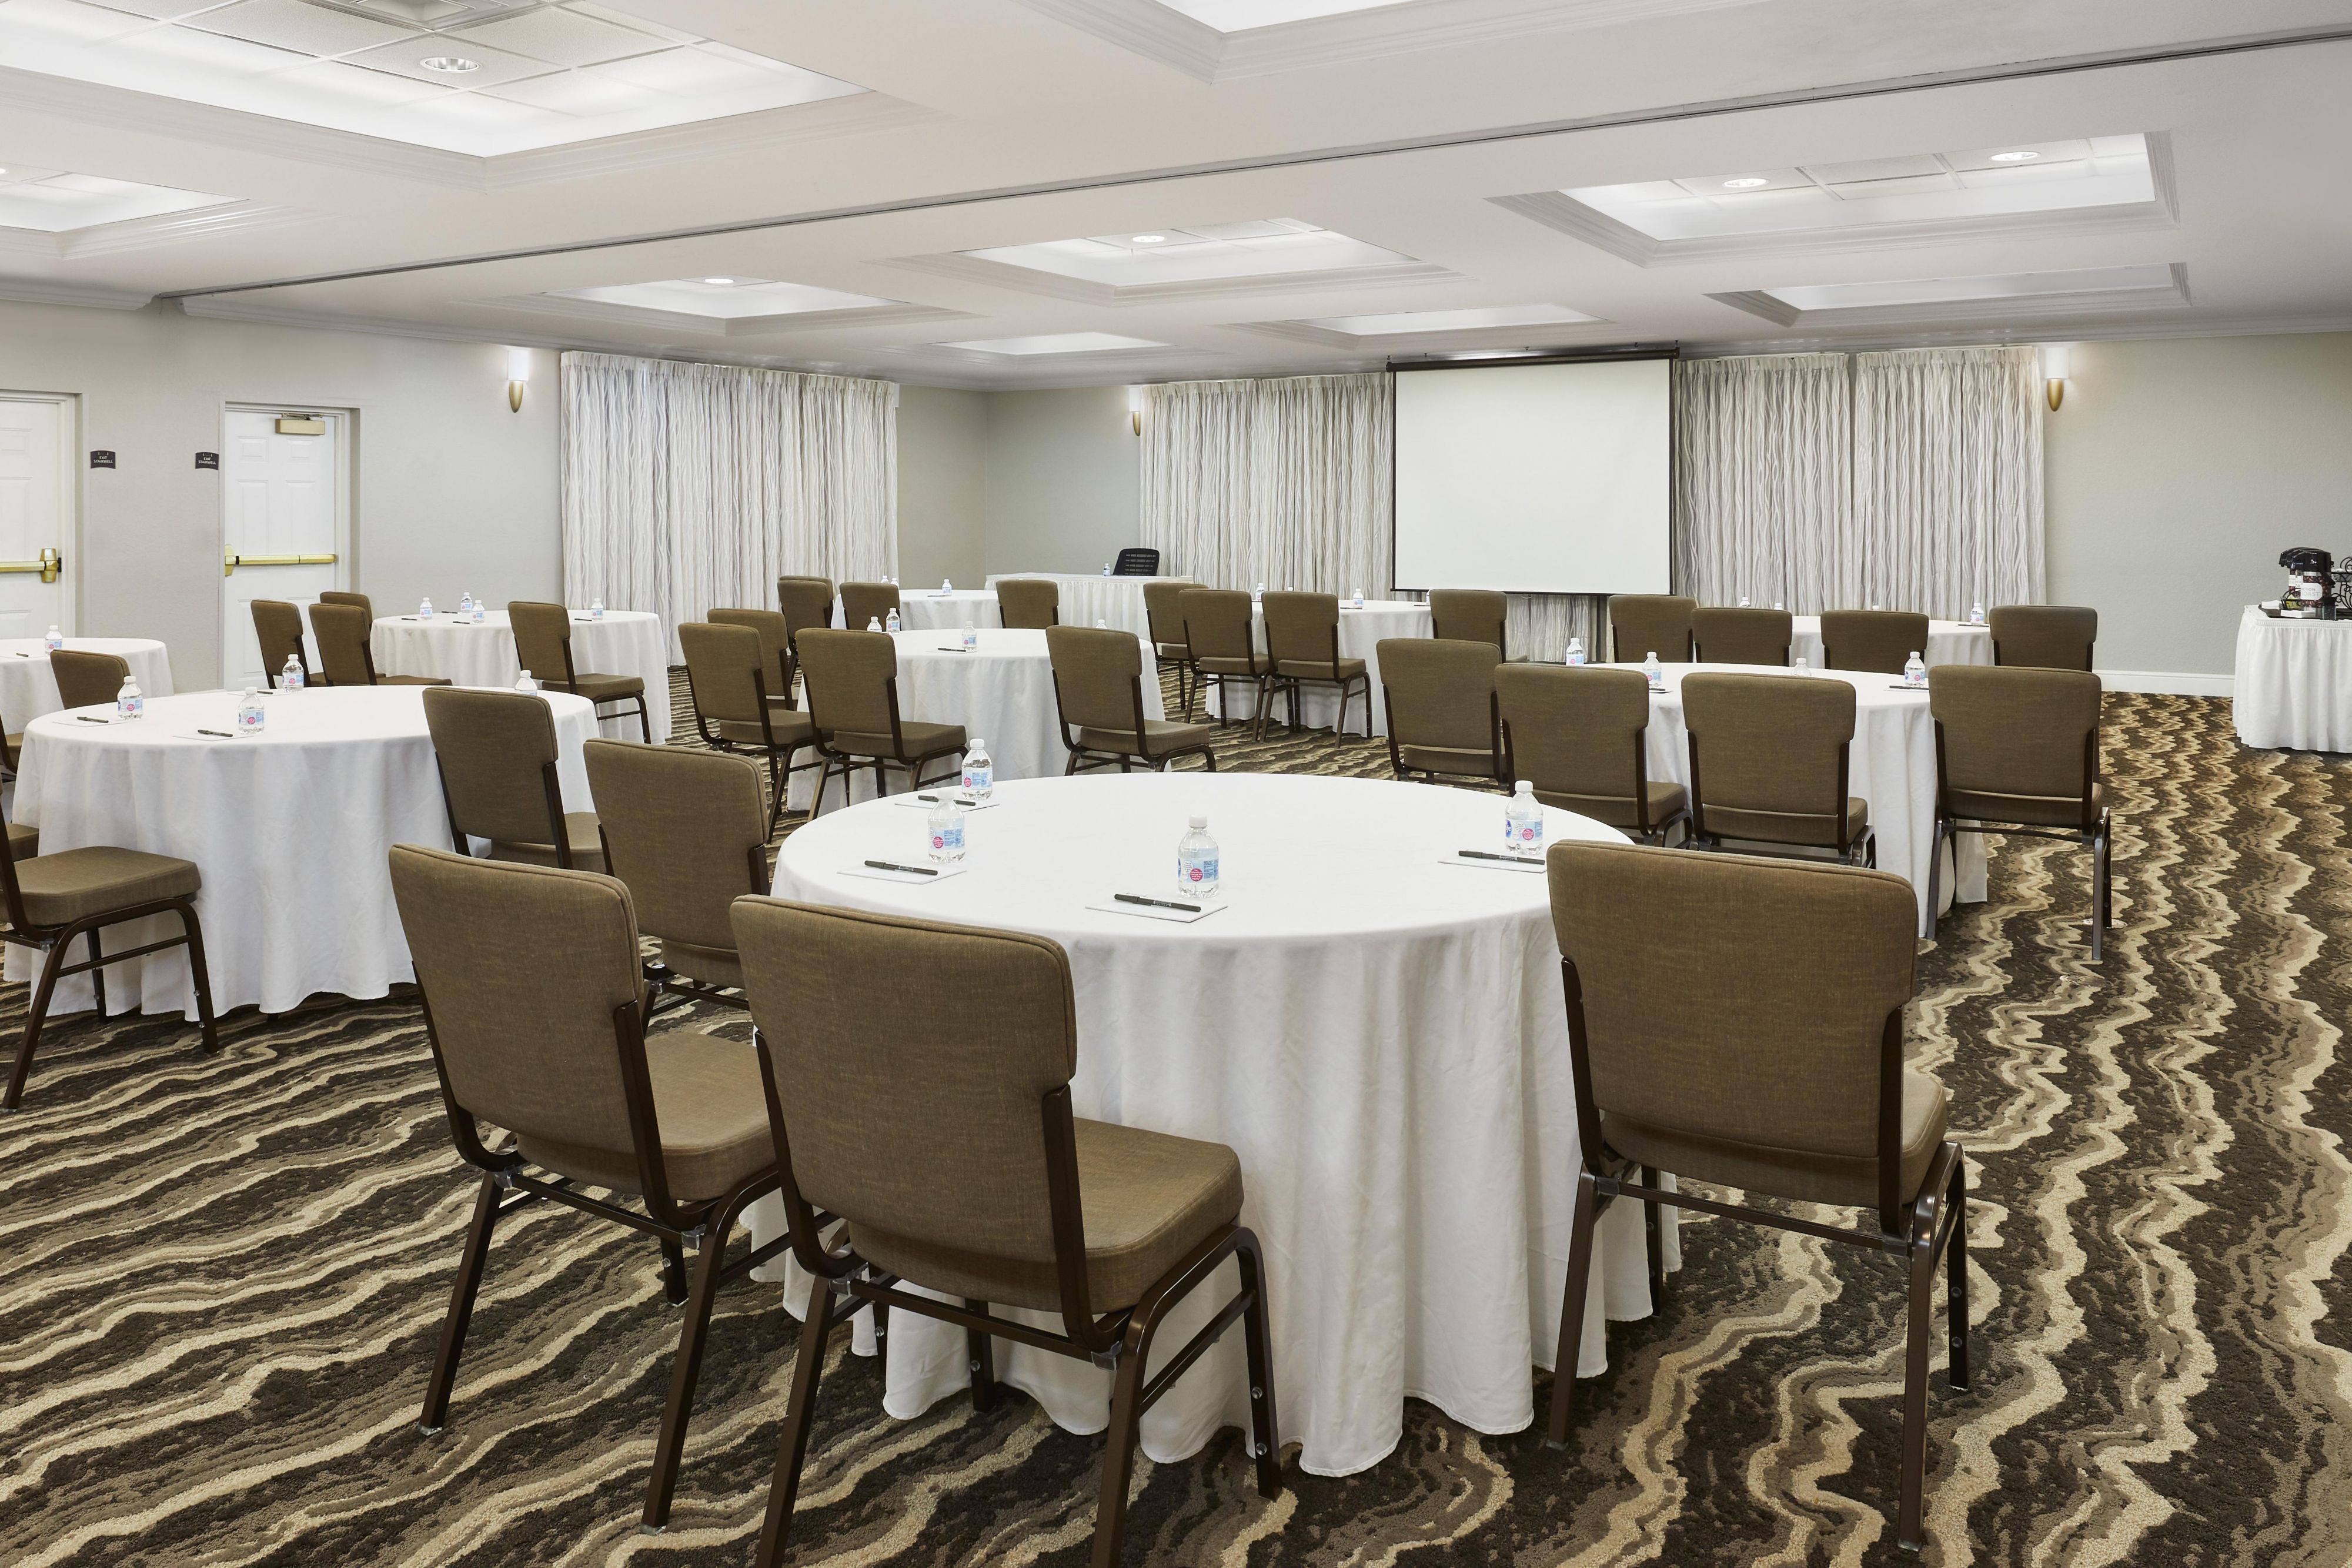 If you're planning a social event or corporate meeting, we have the perfect venue! The Staybridge Suites Orlando Airport offers 2,400 sq. ft. of flexible meeting space. Our team looks forward to serving you. 